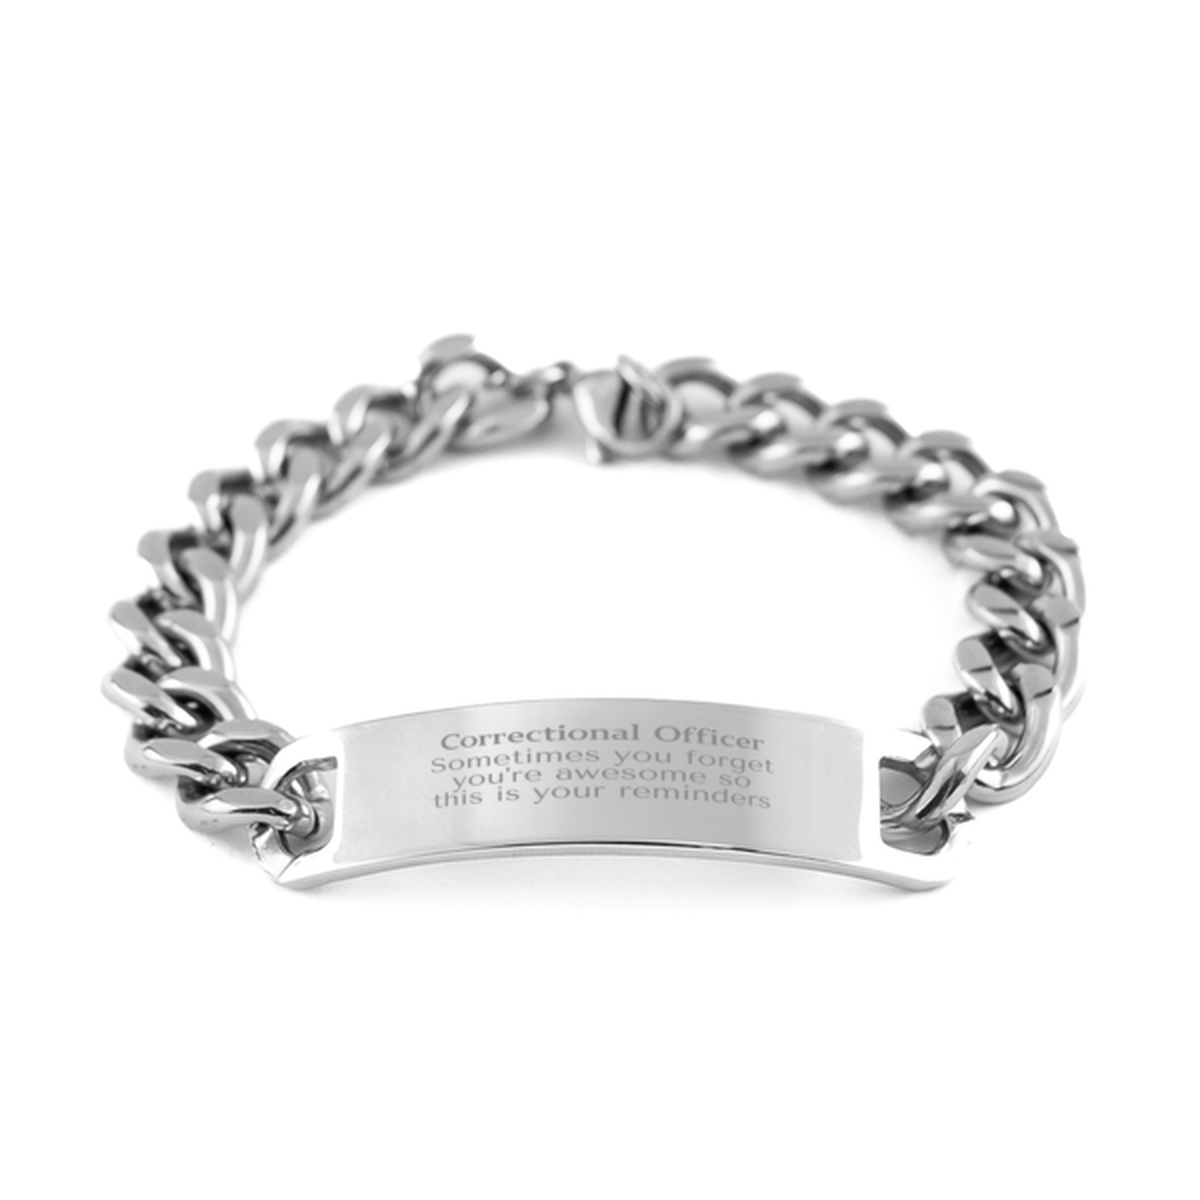 Sentimental Correctional Officer Cuban Chain Stainless Steel Bracelet, Correctional Officer Sometimes you forget you're awesome so this is your reminders, Graduation Christmas Birthday Gifts for Correctional Officer, Men, Women, Coworkers